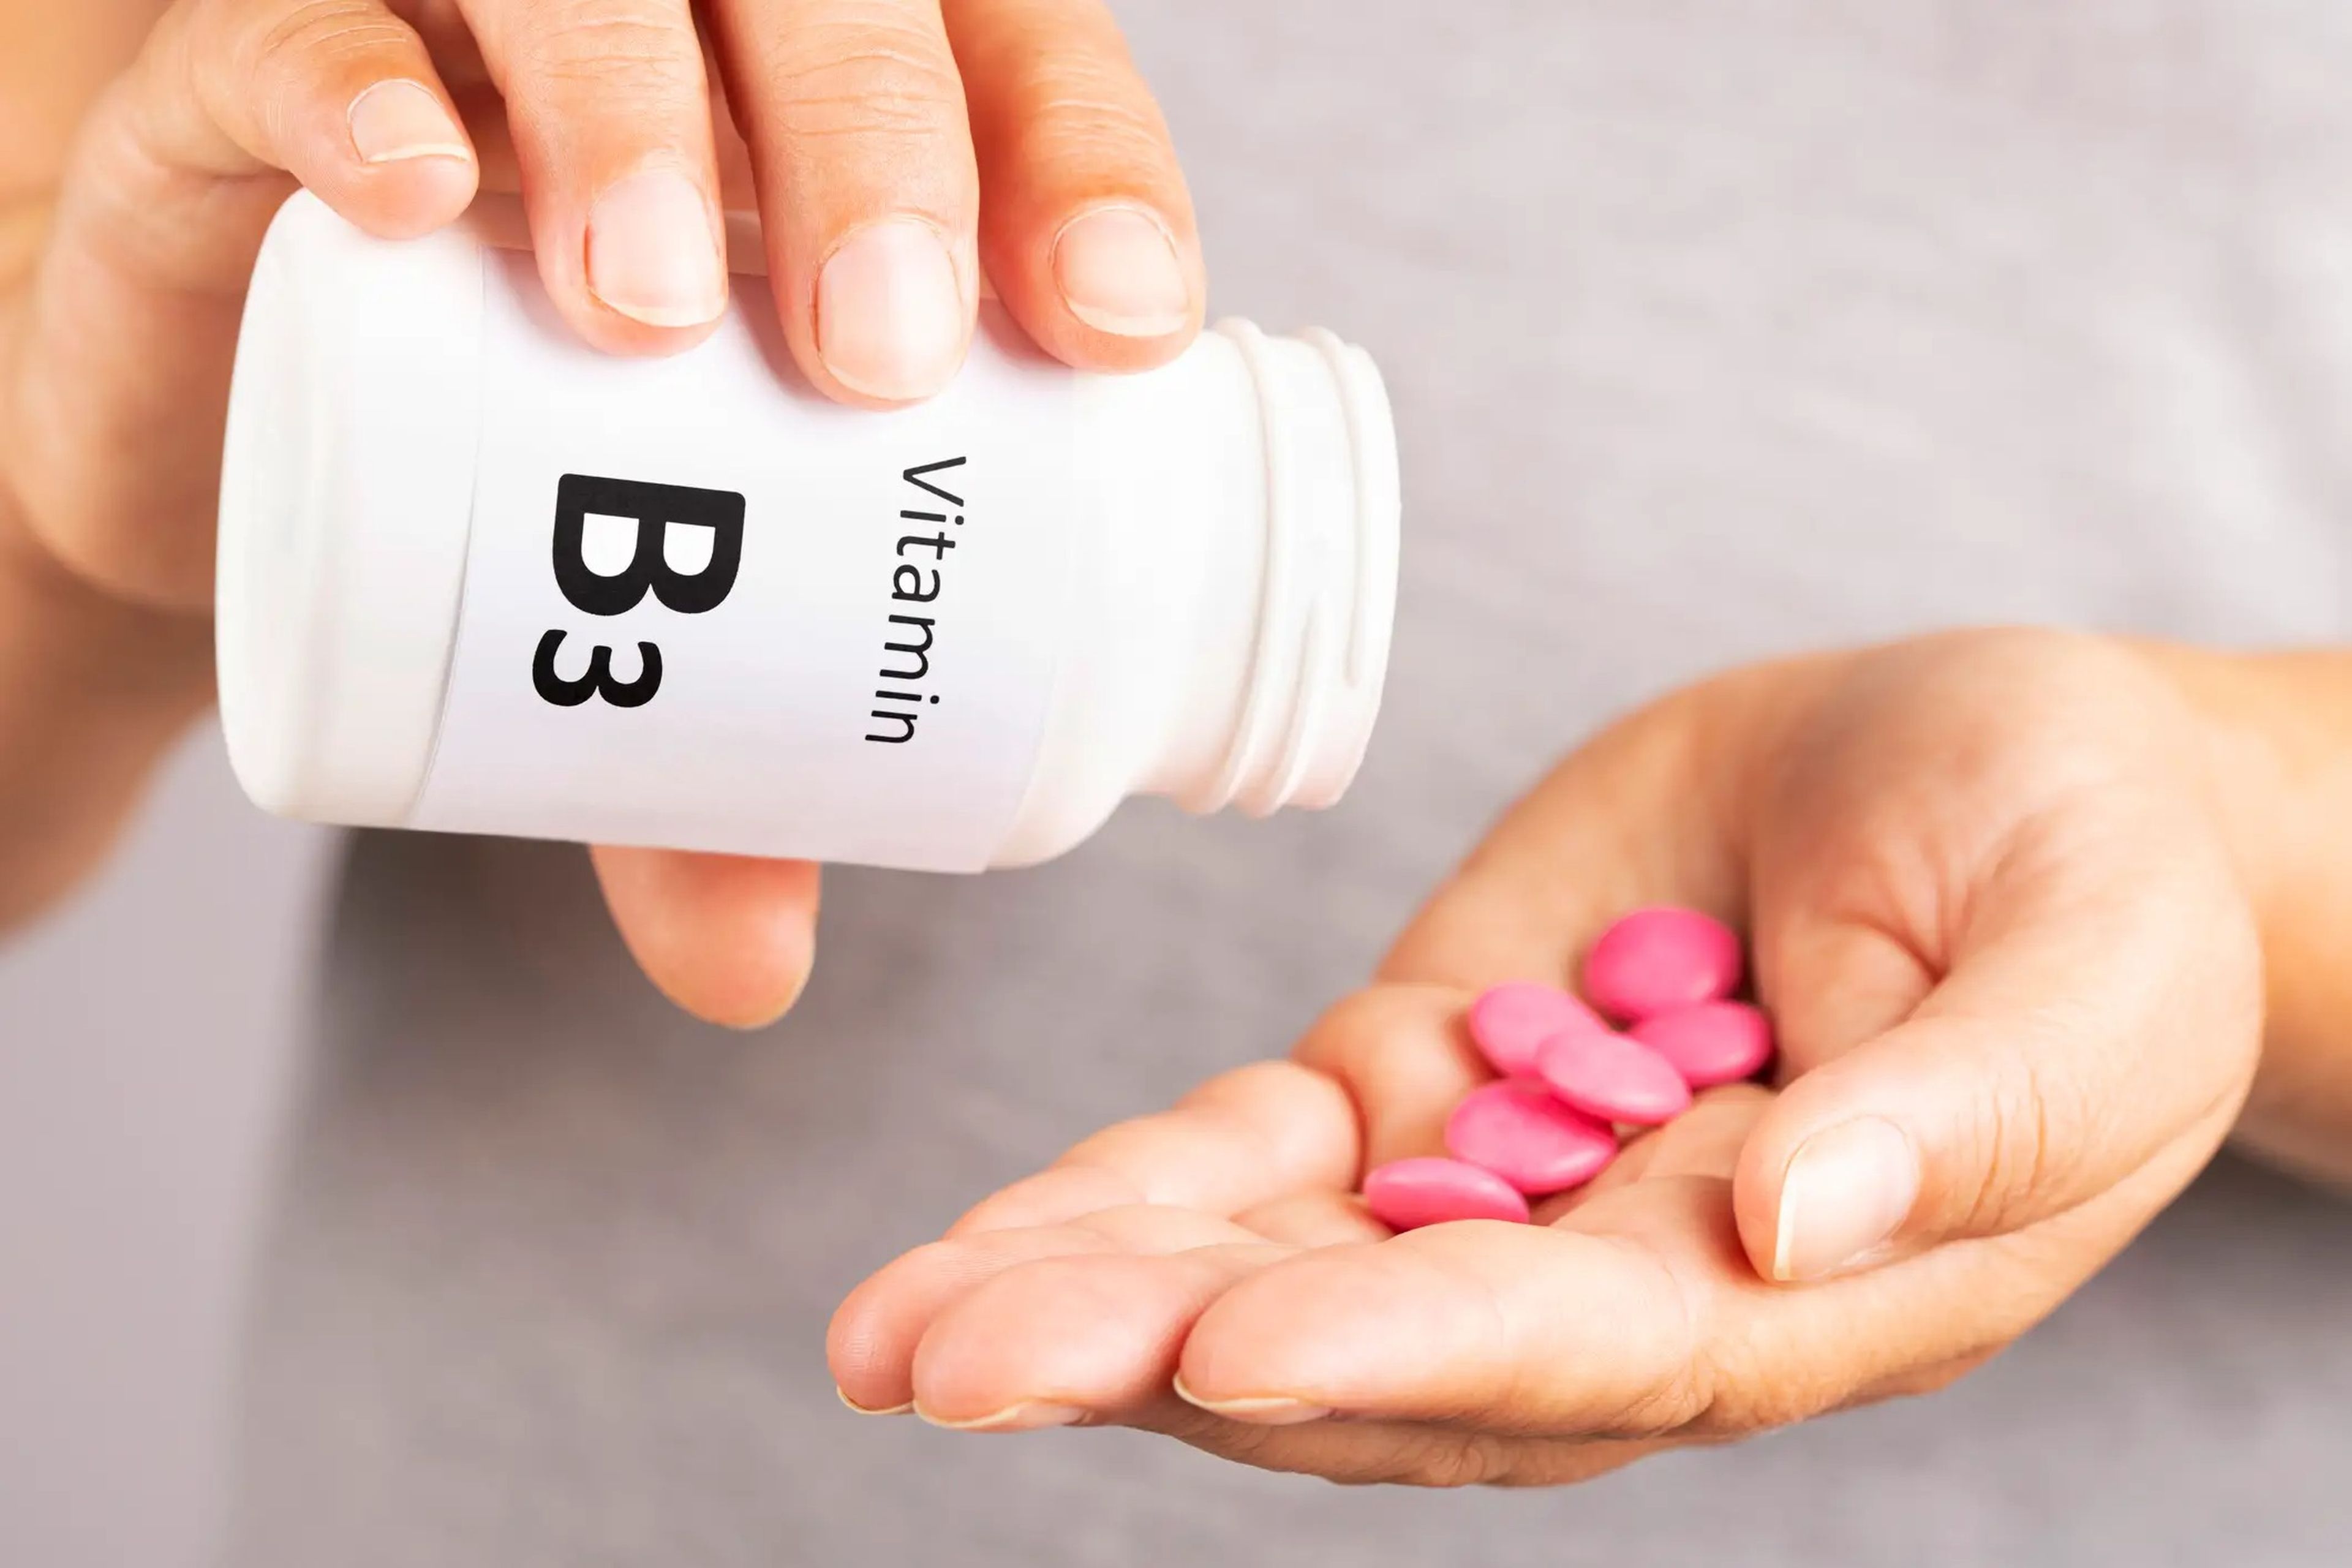 A close-up of a person's hands, one pouring pink pills from a bottle labeled "Vitamin B3" into the other hand.